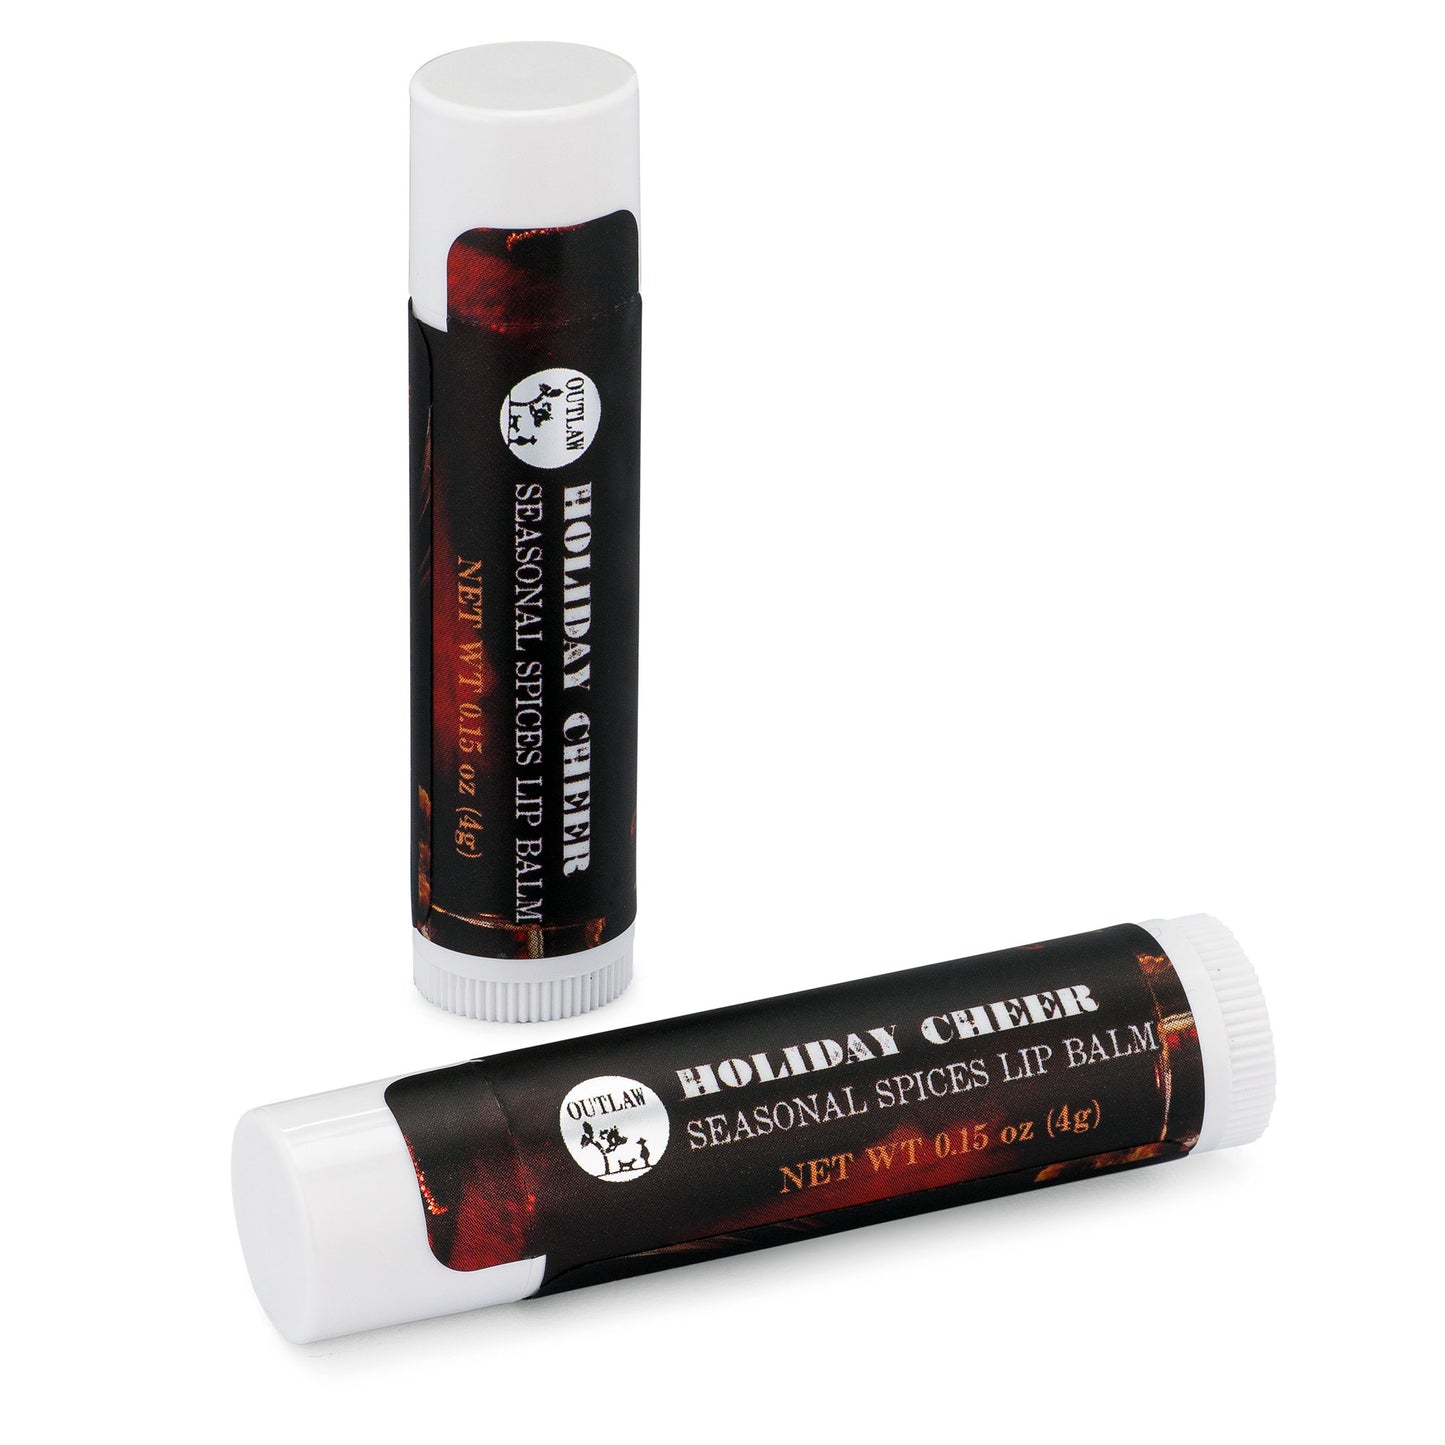 Outlaw holiday cheer mulling spices flavored lip balm